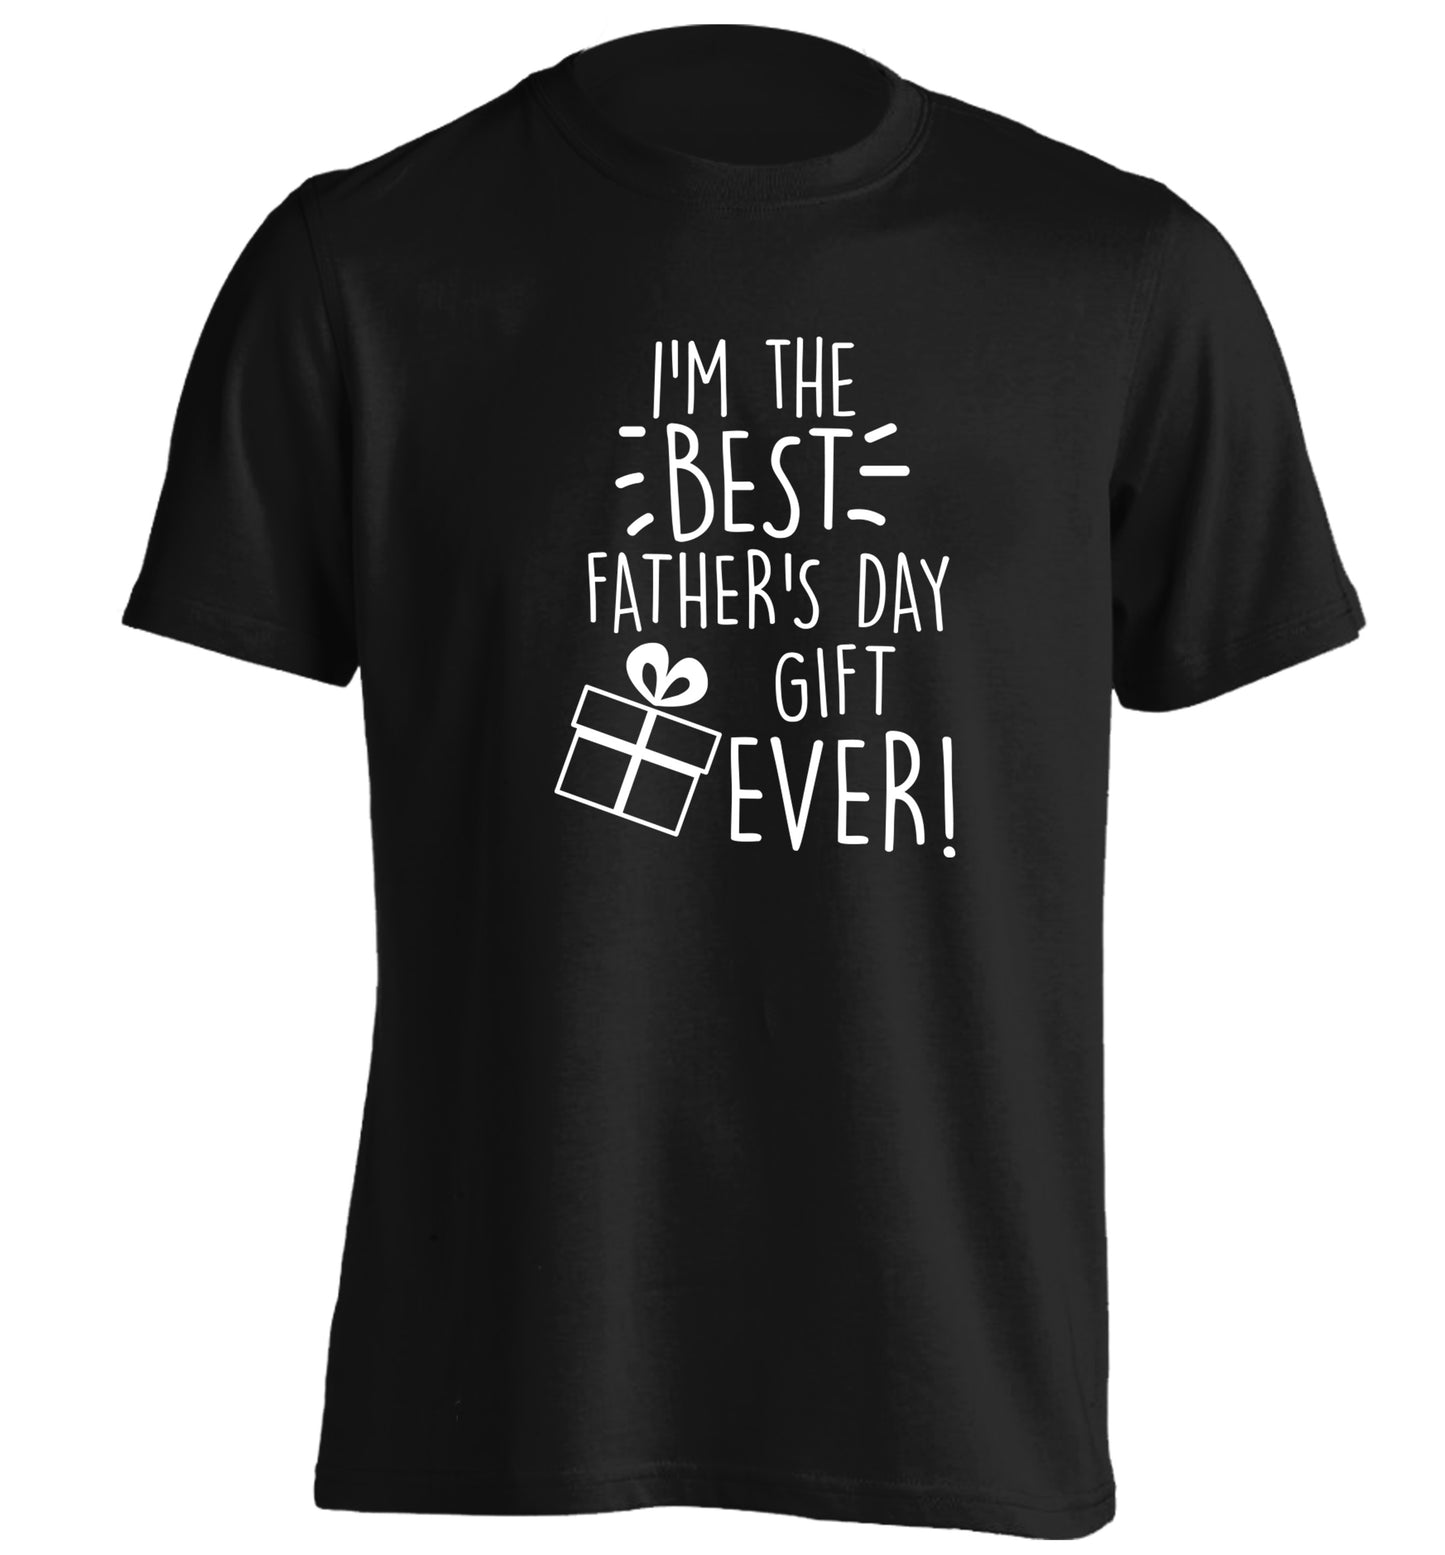 I'm the BEST father's day gift ever! adults unisex black Tshirt 2XL